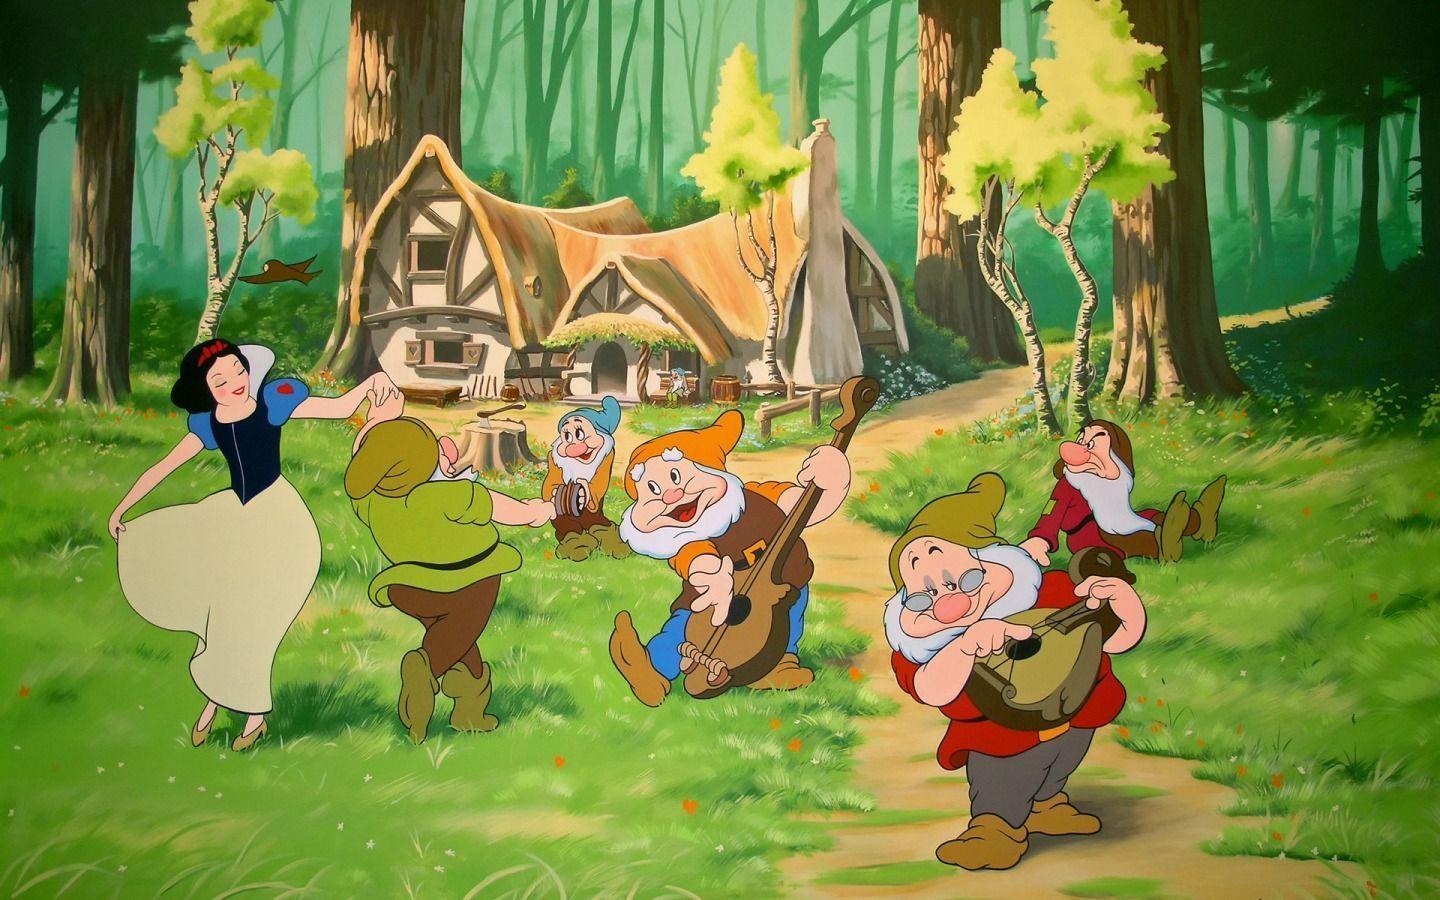 Snow White and the Seven Dwarfs Wallpaper Cartoons Anime Animated